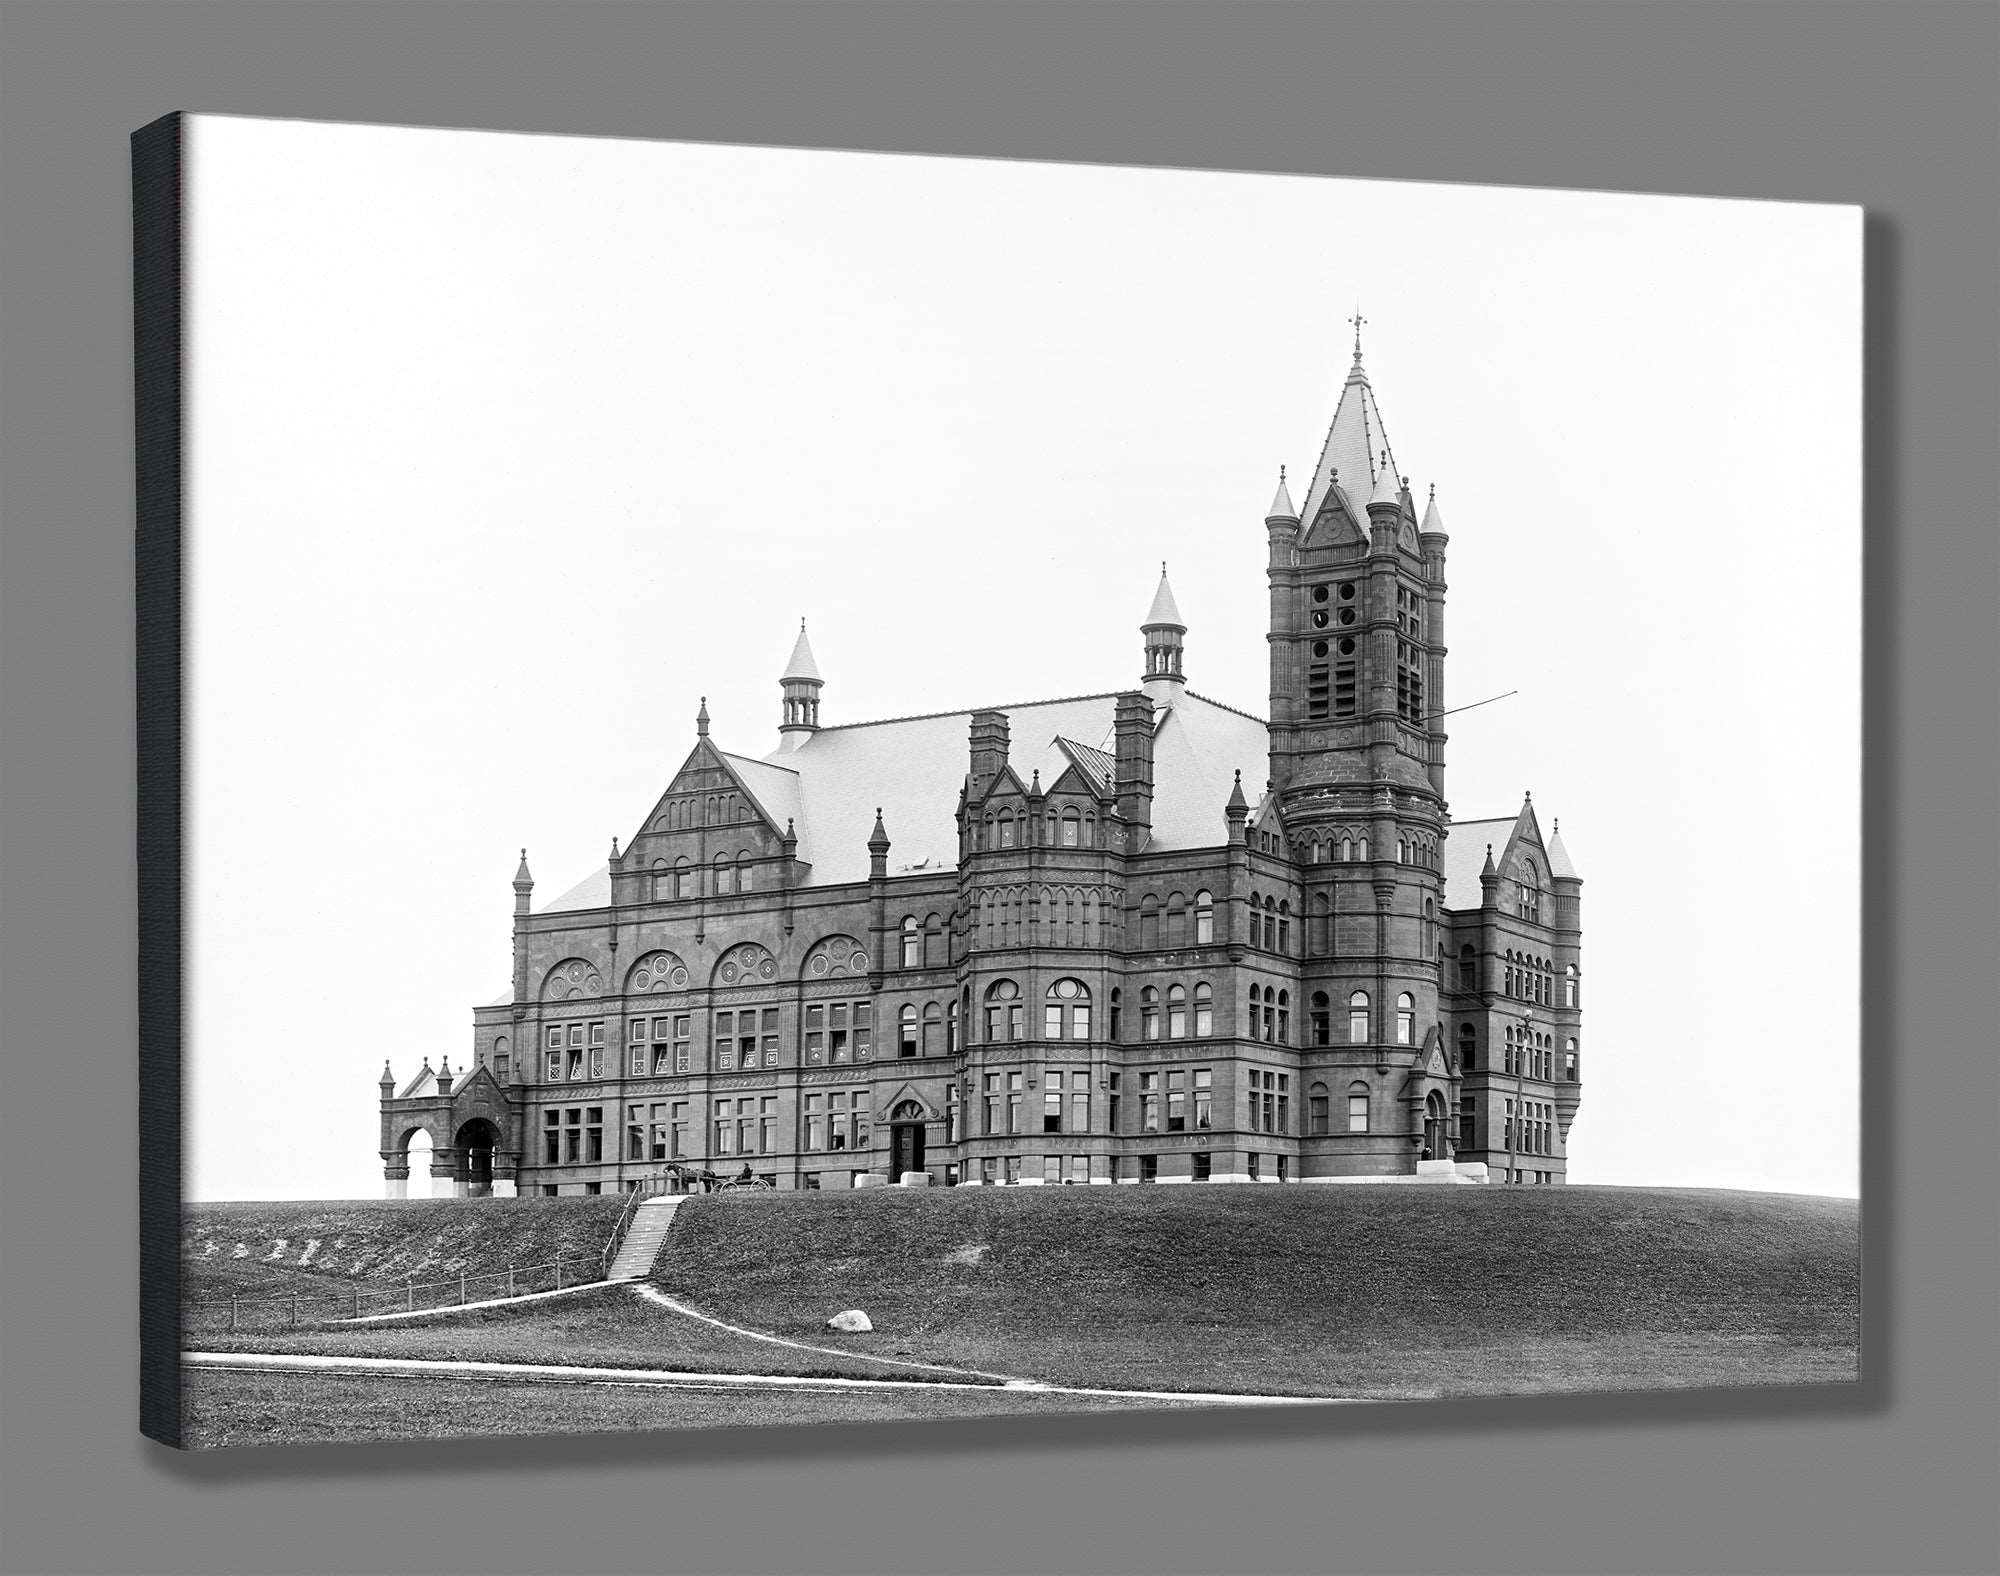 A mockup canvas print of vintage photograph of Syracuse University's campus